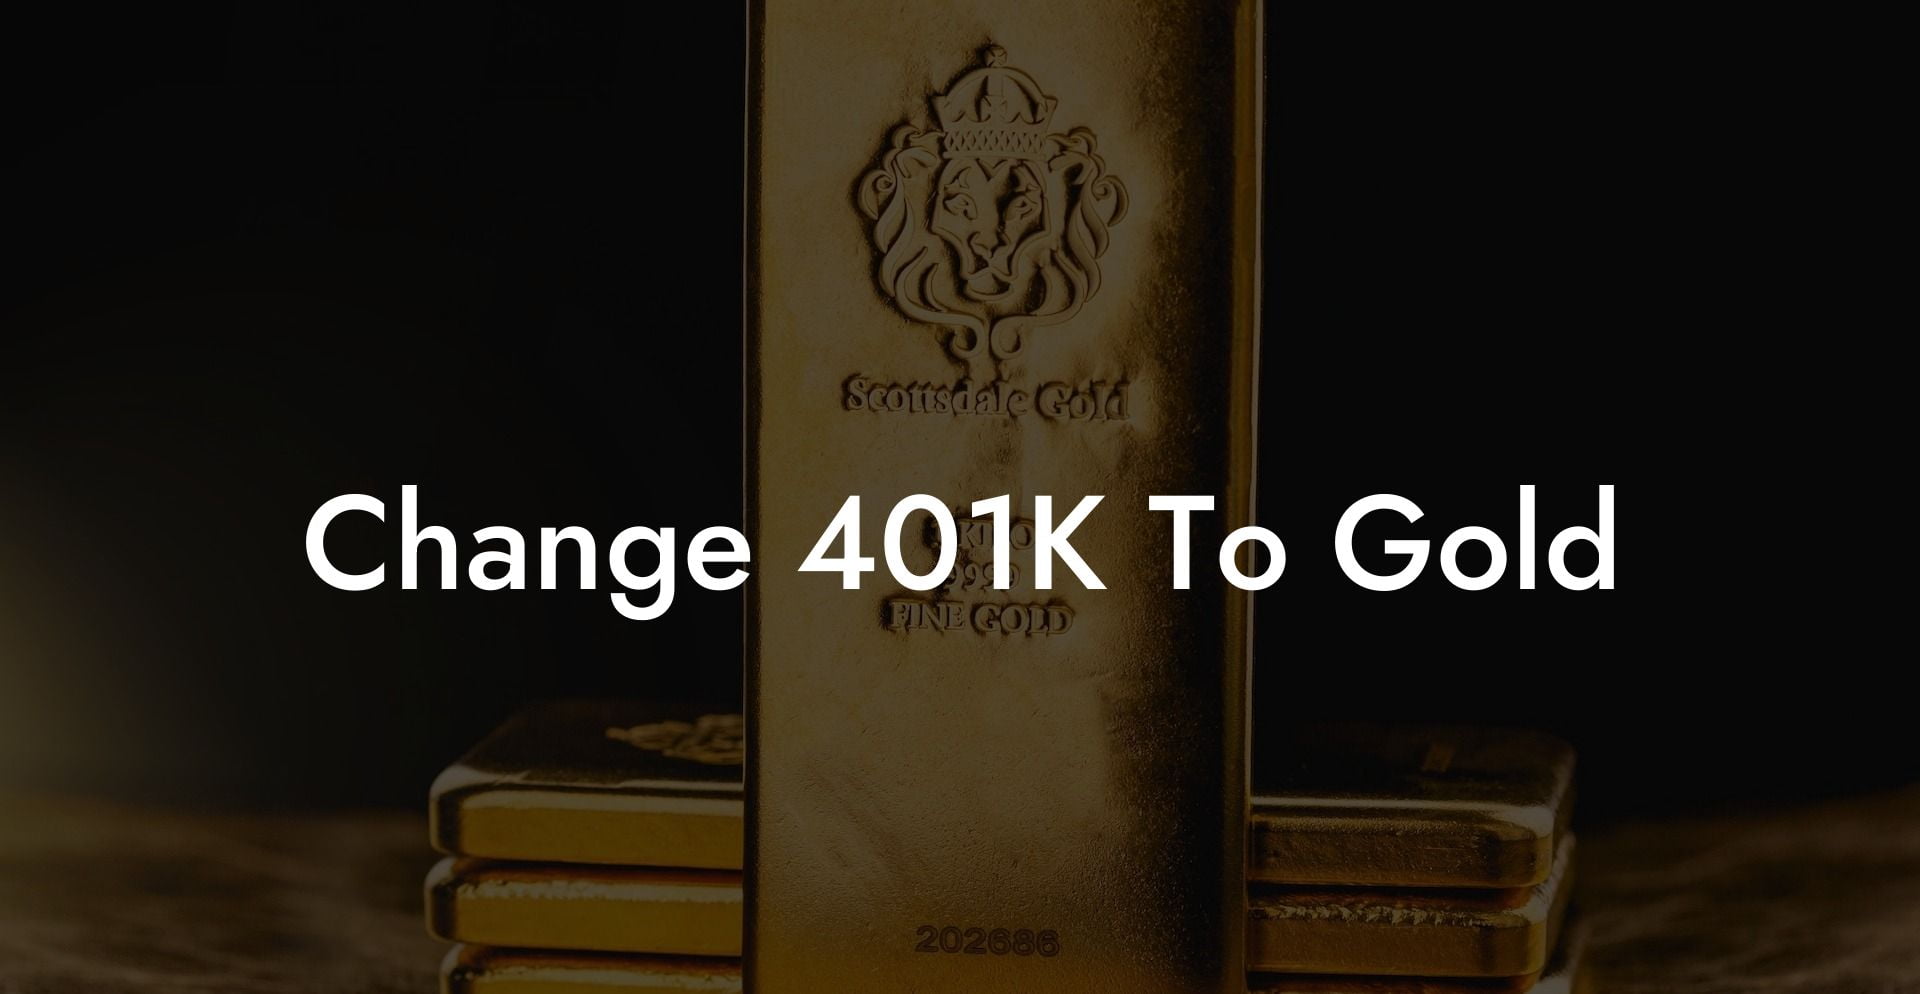 Change 401K To Gold